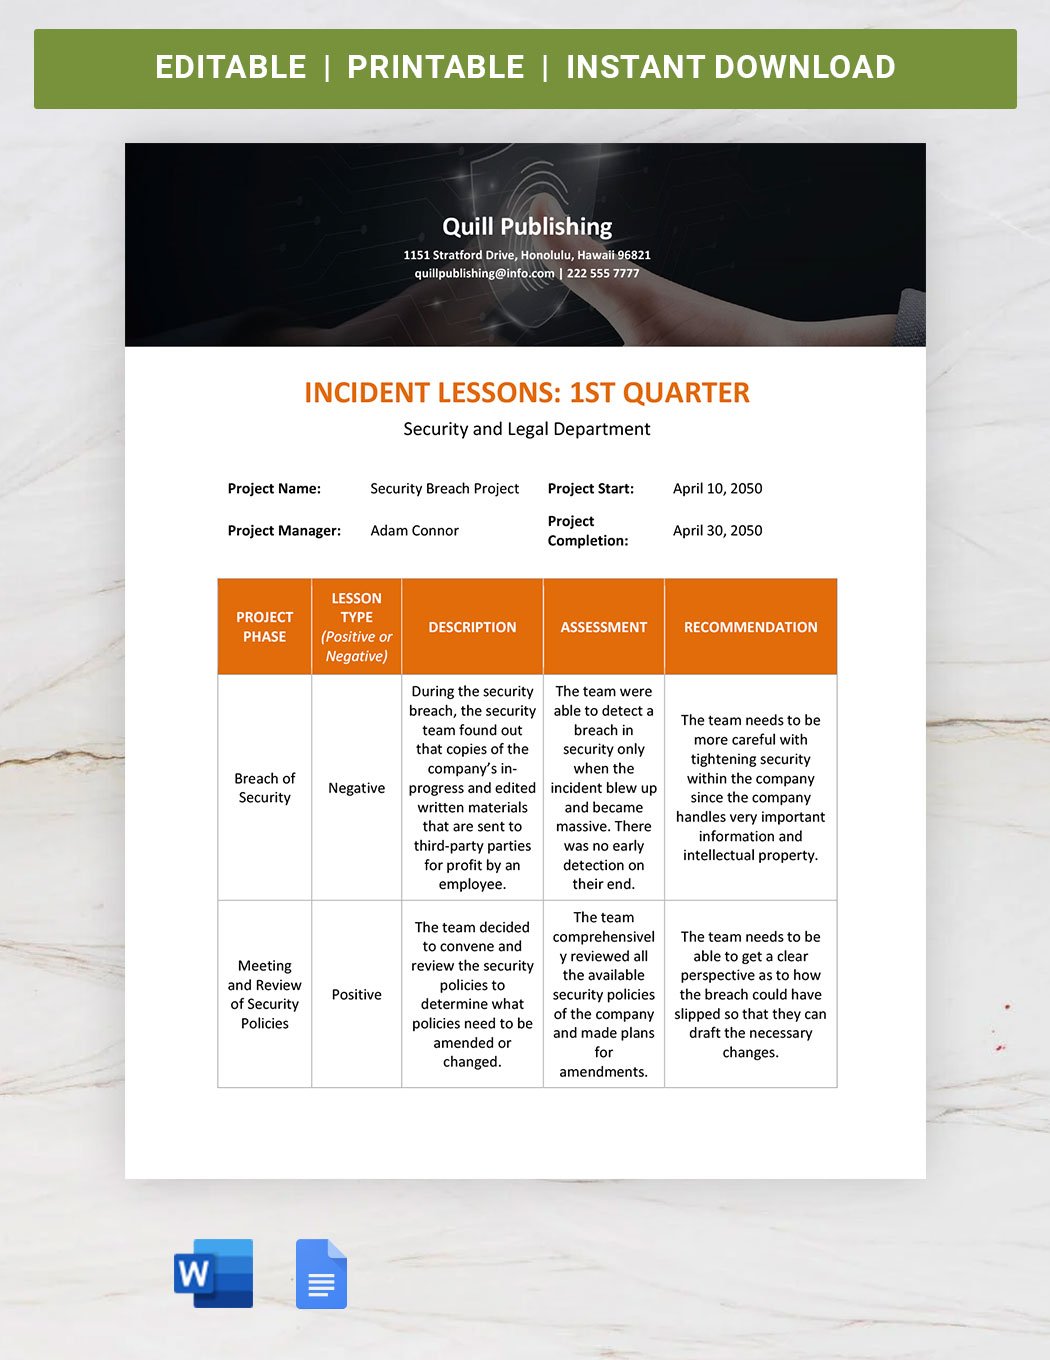 Incident Lessons Learned Template